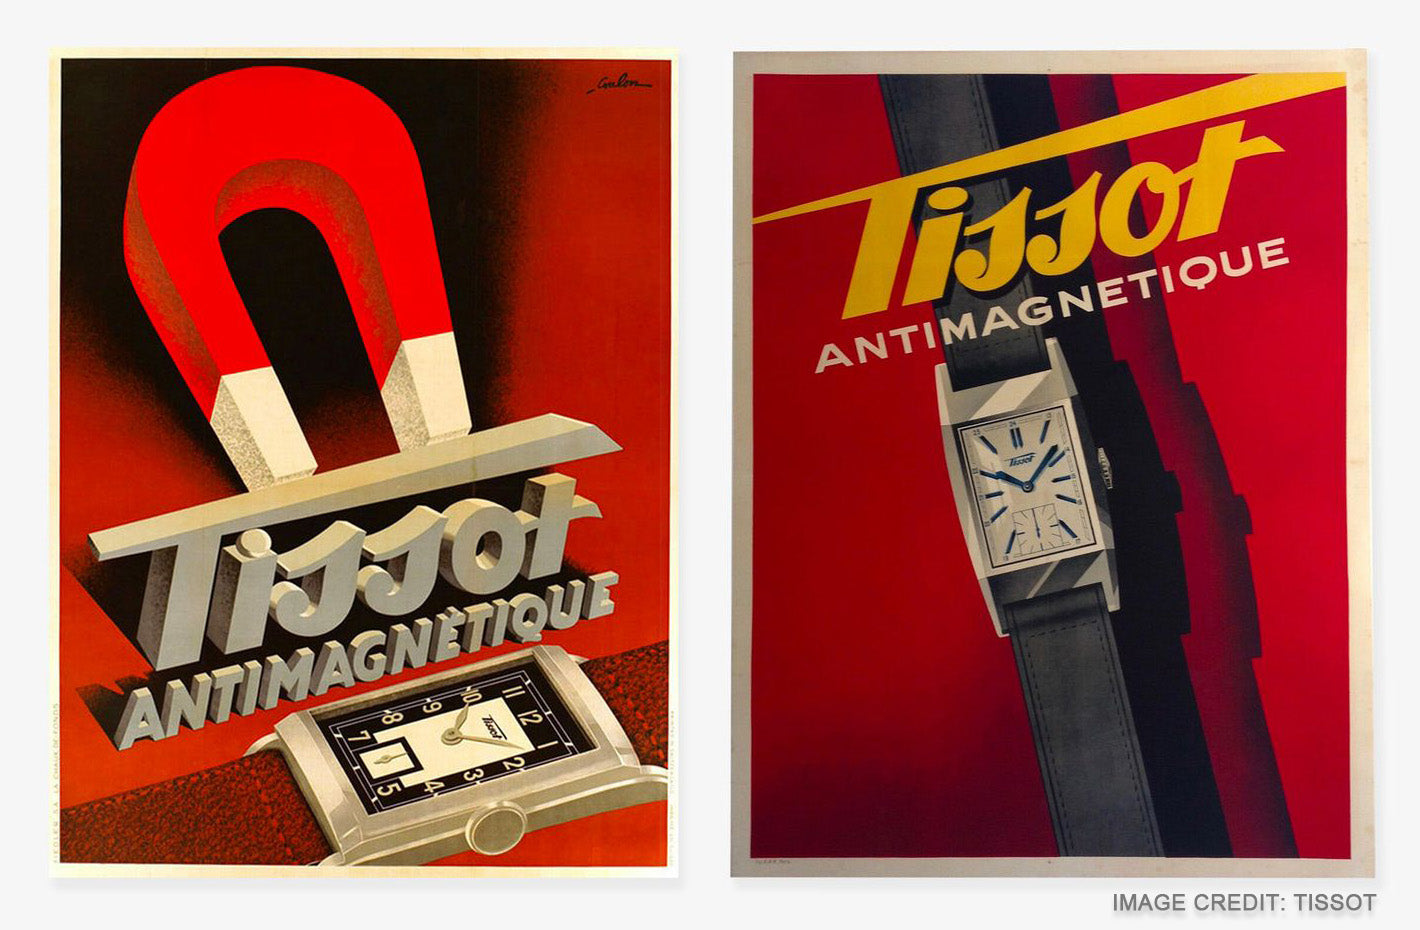 Tissot promotion graphic highlighting their first non-magnetic wristwatch in 1930, by Strapcode watch bands